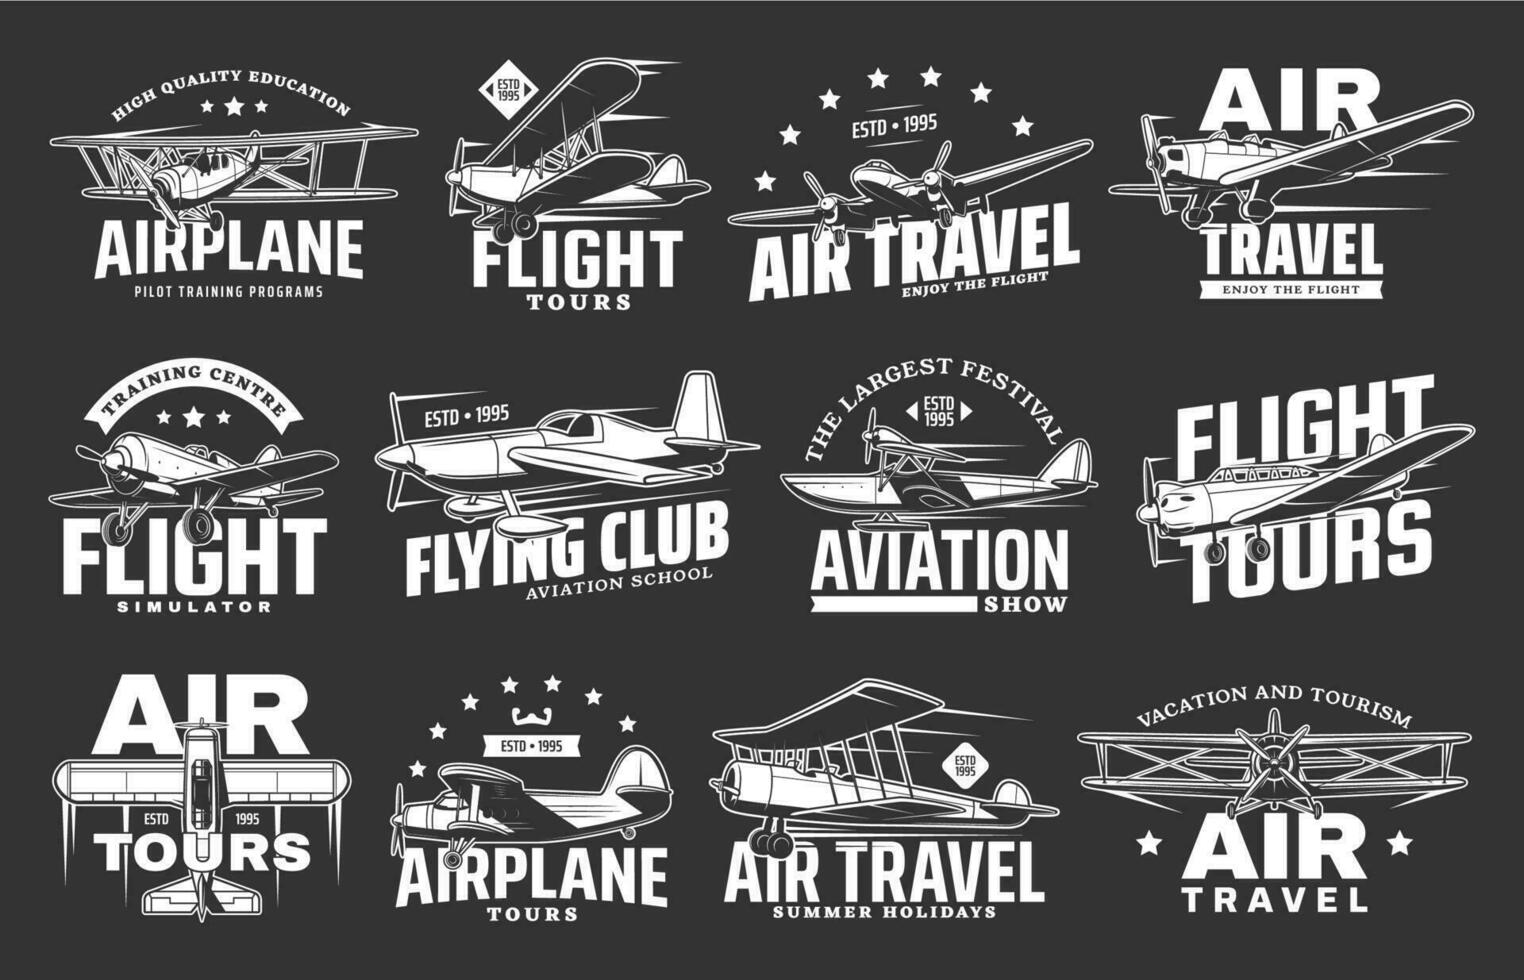 Aviation icons of airlines plane tours, air travel vector